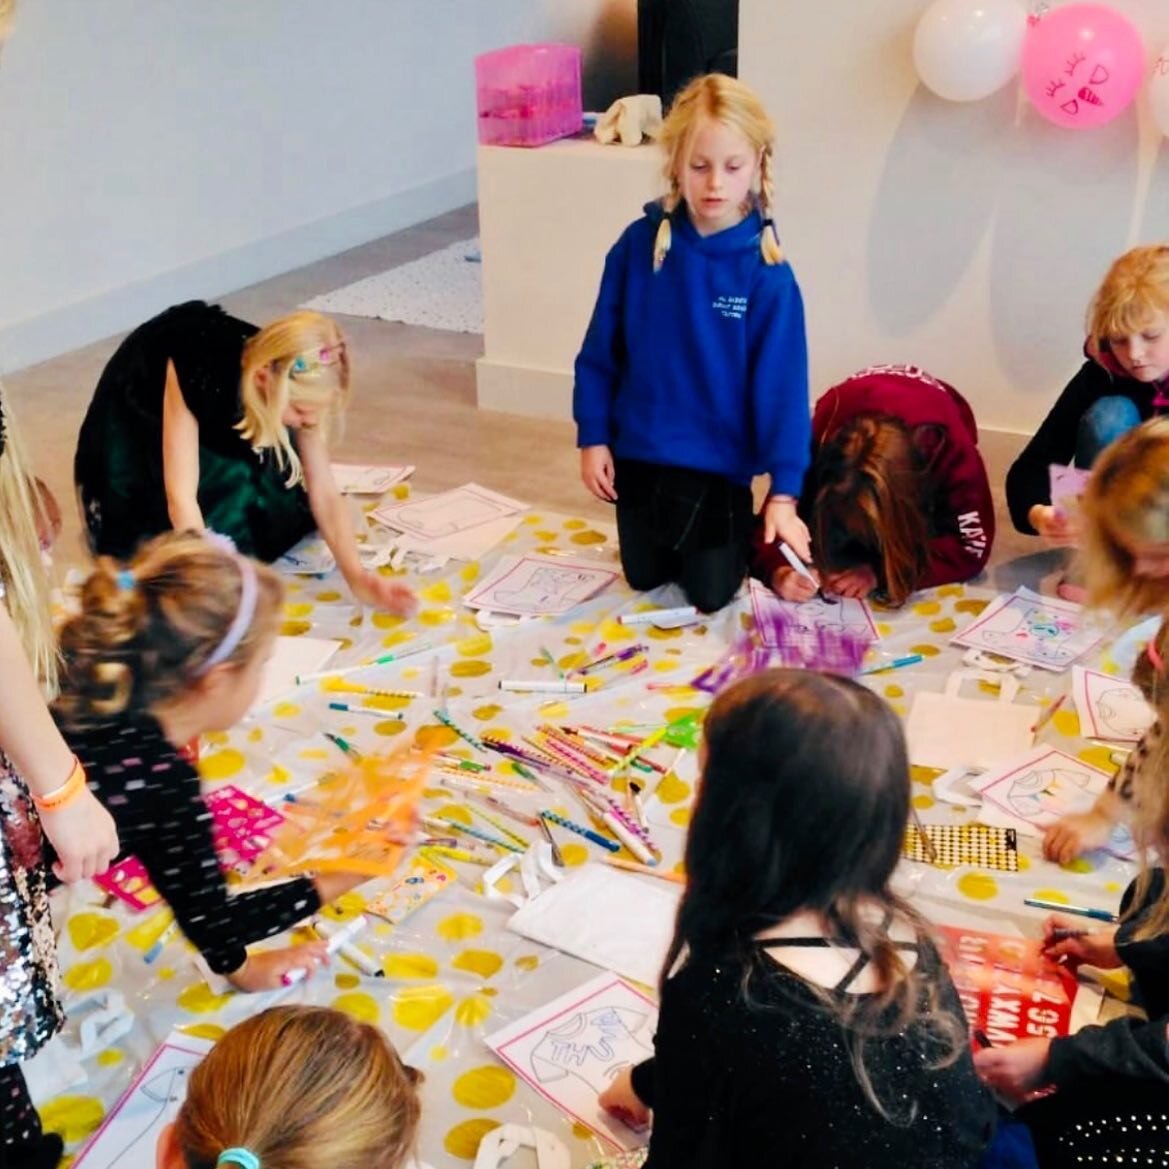 Kids can get creative anywhere! That&rsquo;s just all part of the fun at our @sequinsandsparkles.parties 🎉🥳#kidsparty #birthdayparty #party #kidspartyideas #birthday #partyideas #partyplanner #kids #partypackage #eventplanner #partydecor #sequinpat